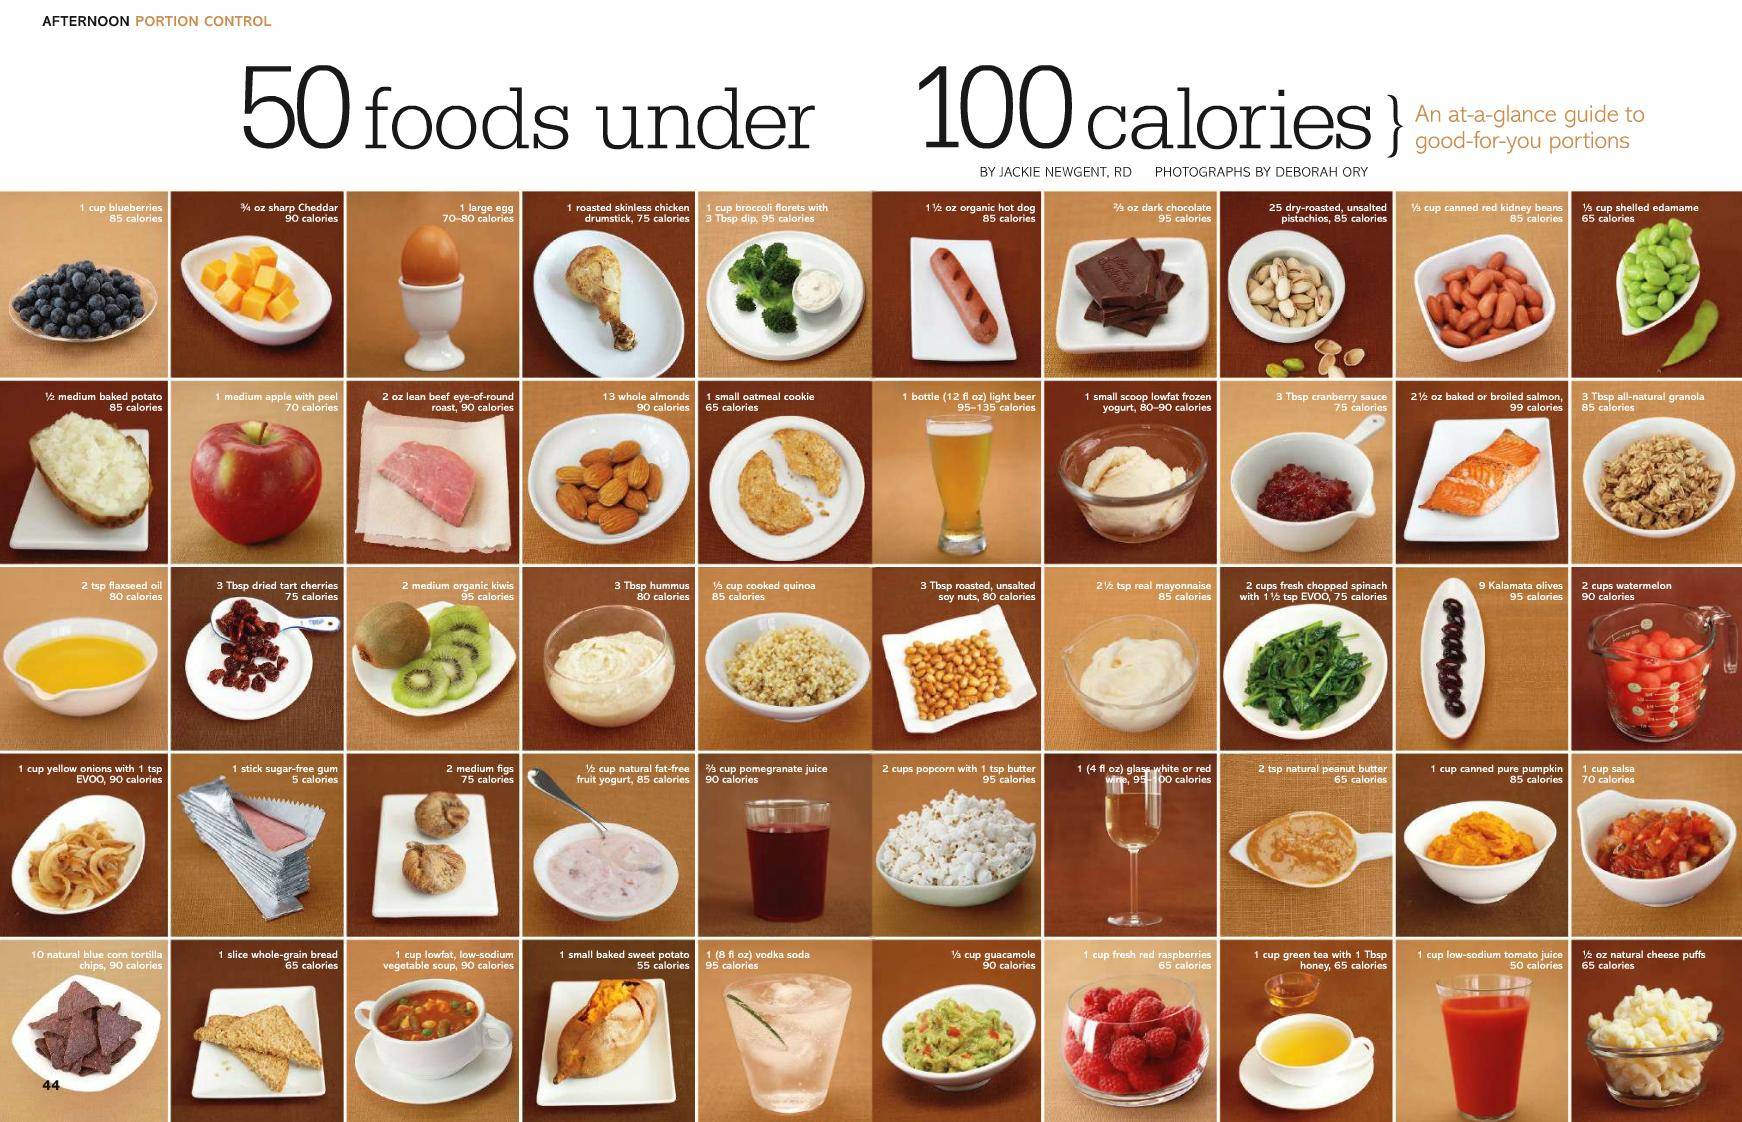 Found this really cool poster showing 50 foods under 100 calories ...